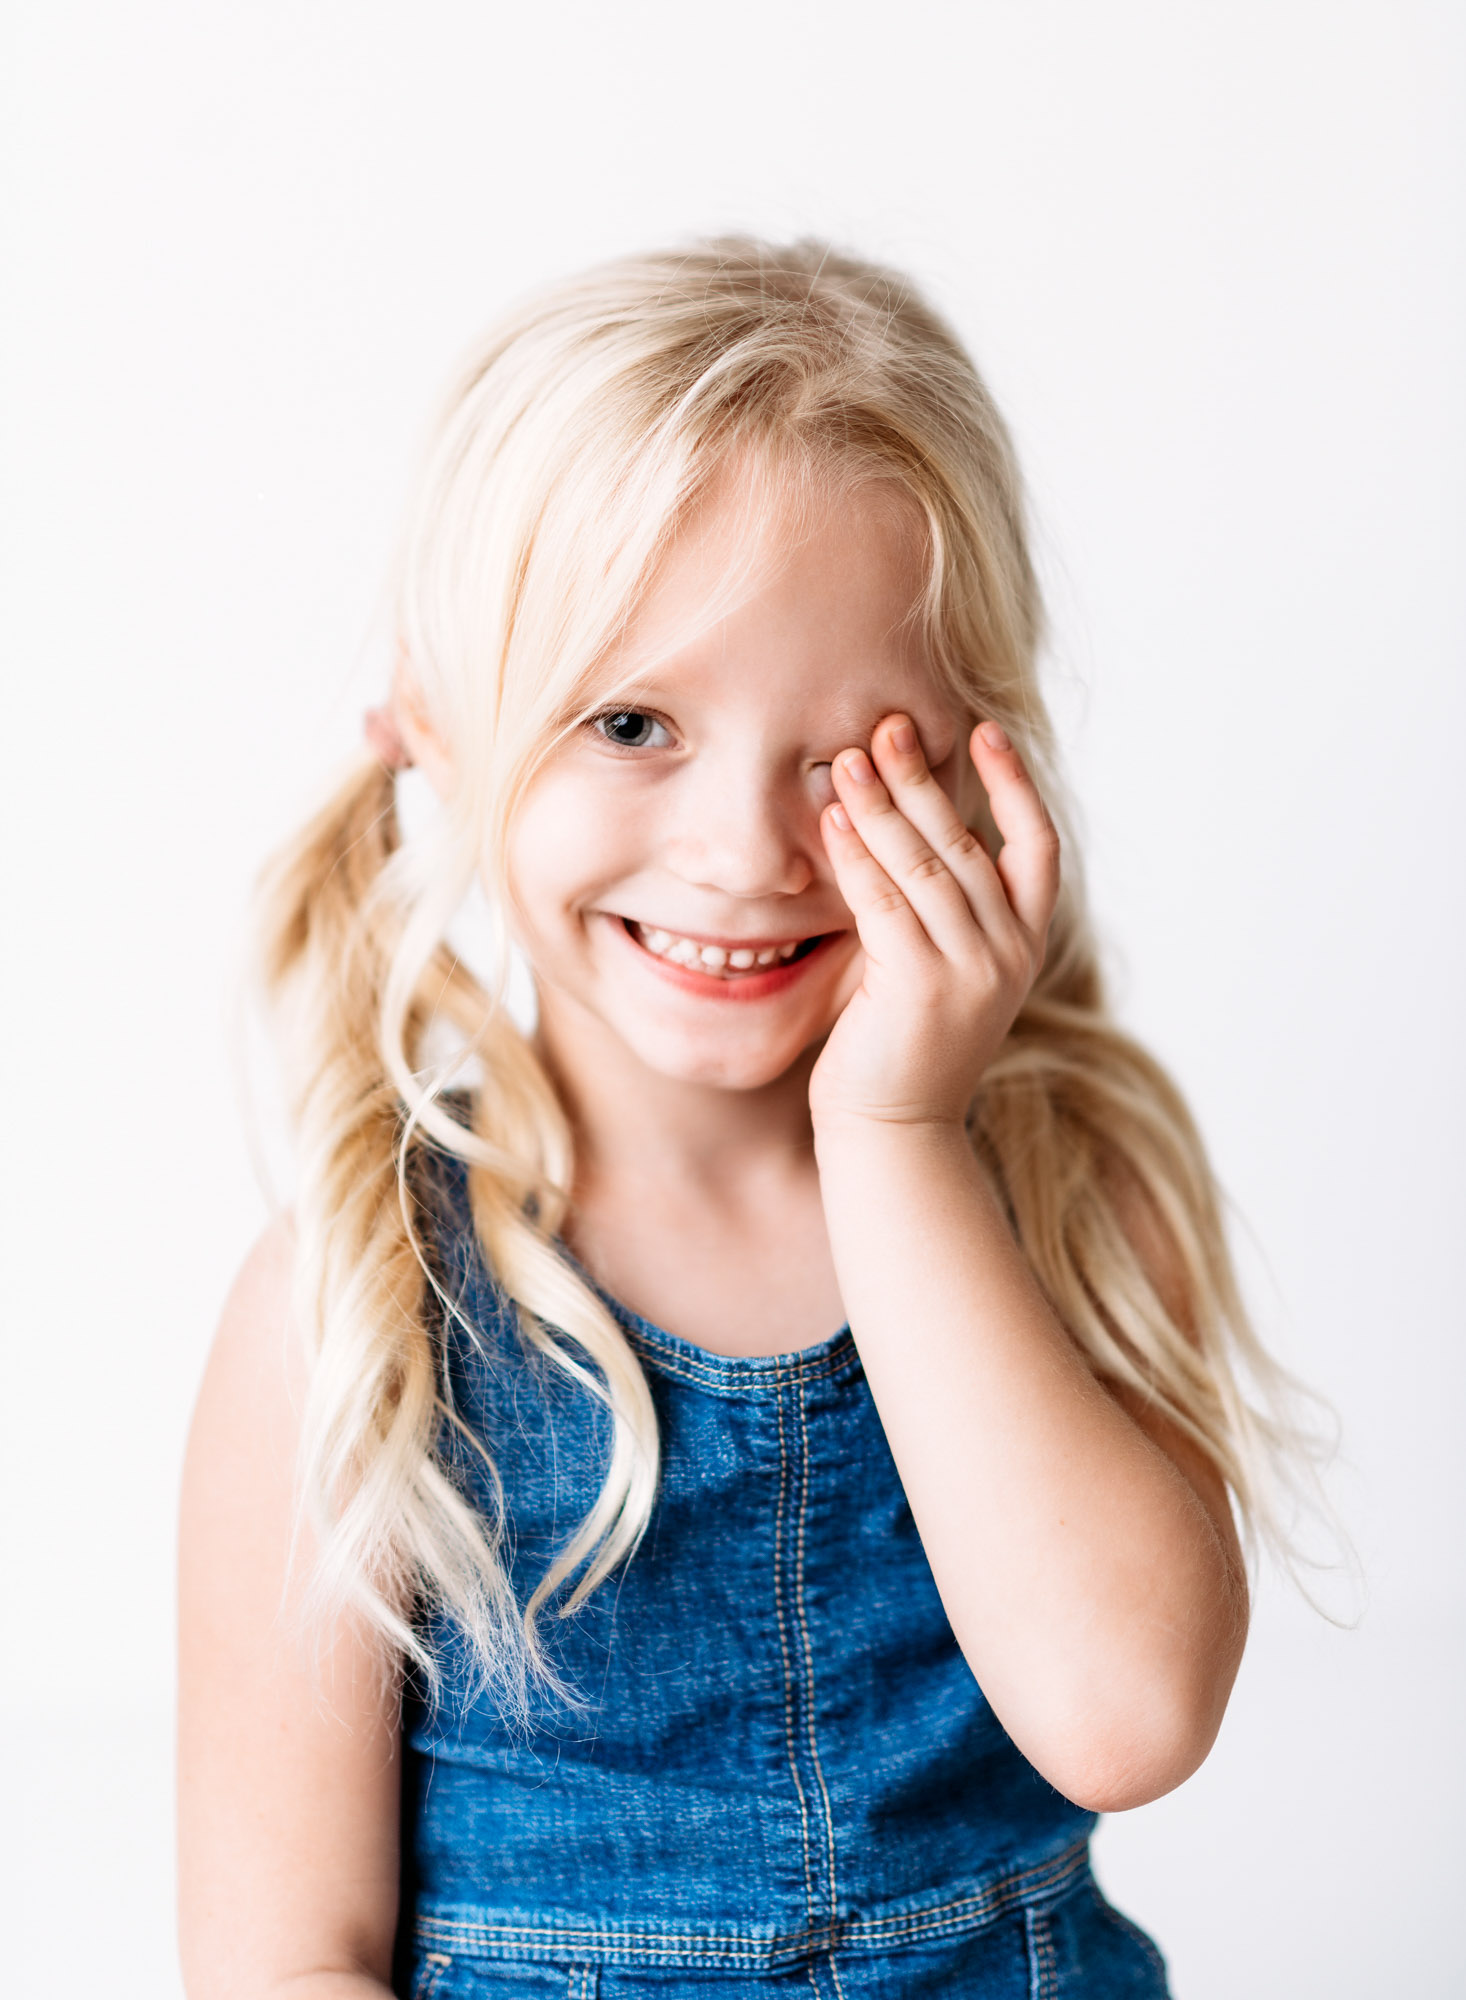 A sarasota photographer captures a little girl in a denim dress with her hand on her face.